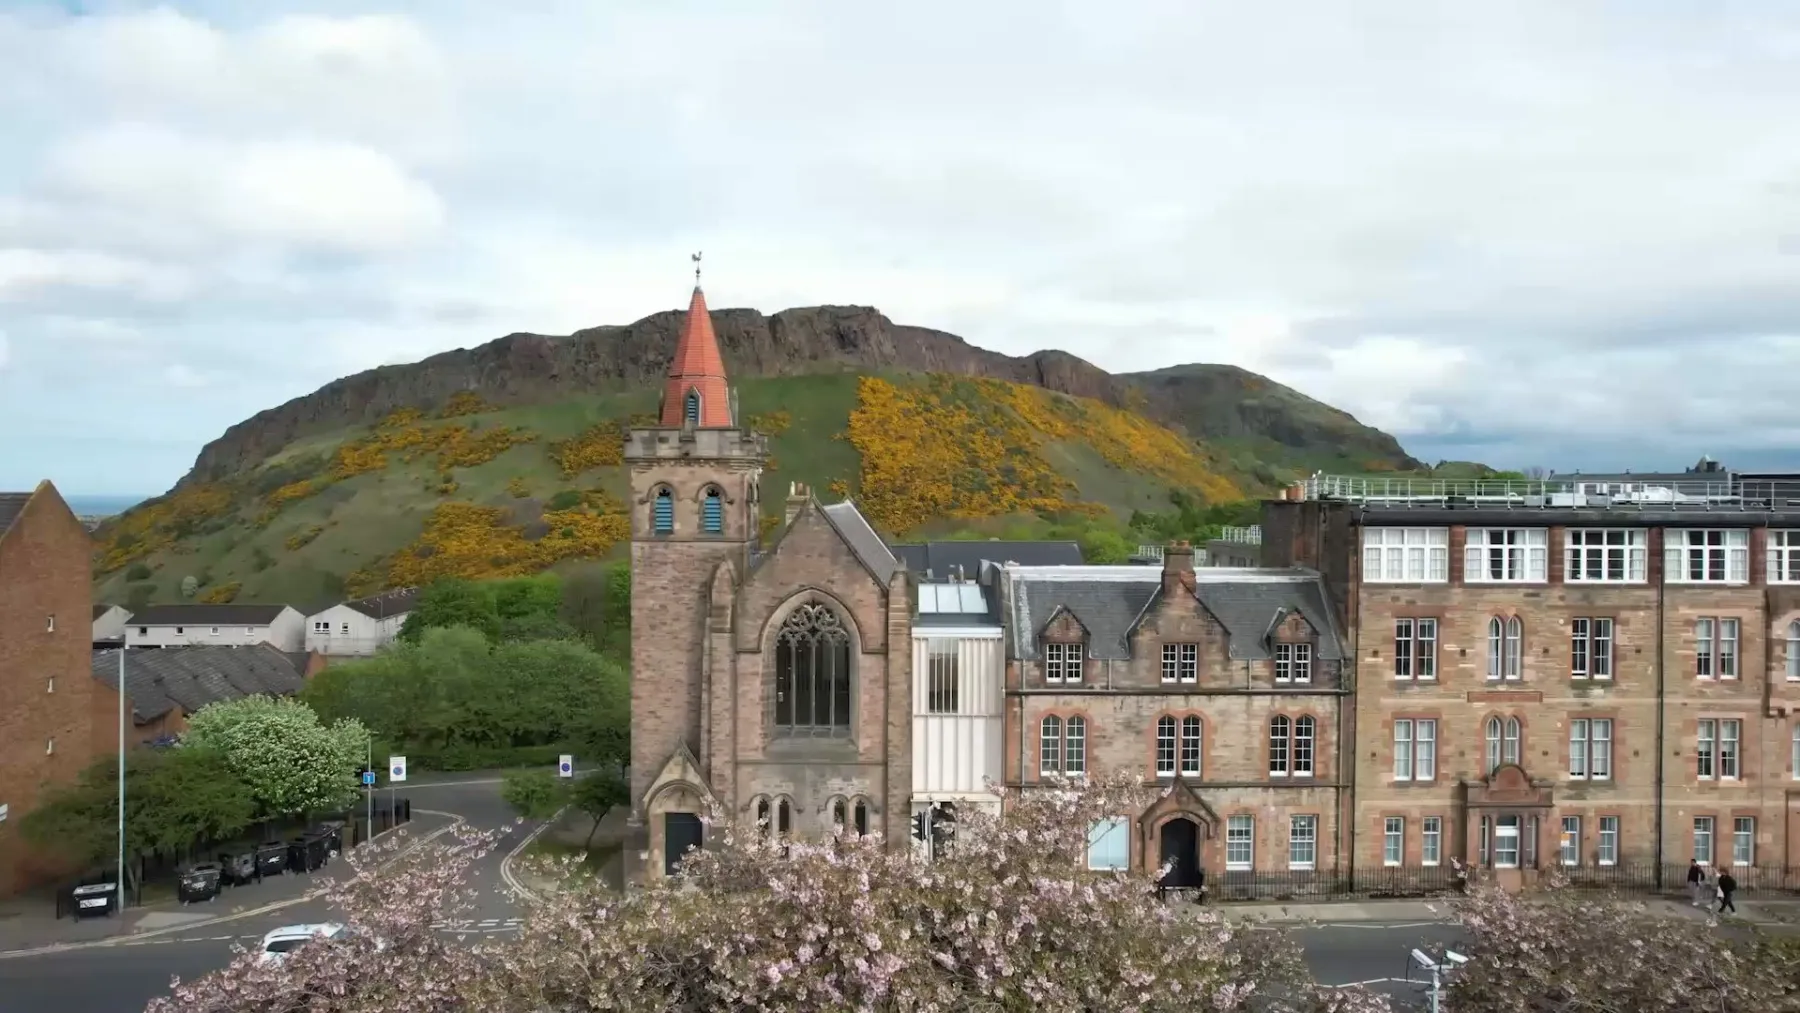 Greyfriars Charteris Centre, Edinburgh. A church building with a contemporary extension inserted between in and further stone-built buildings. Cherry blossom is in the foreground with Arthur's Seat is the background.